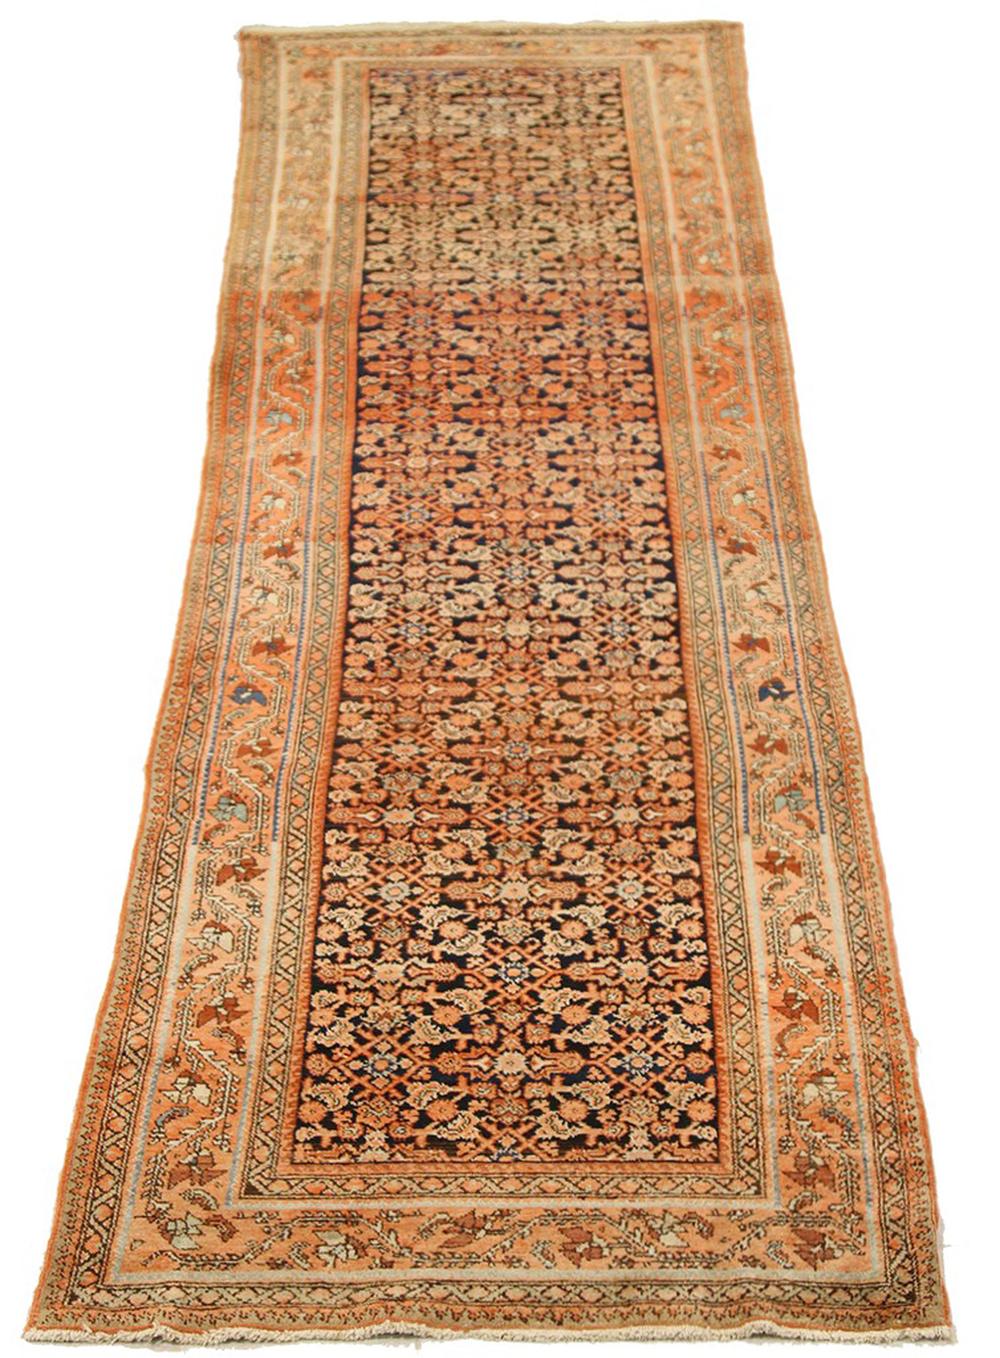 Antique Persian runner rug handwoven from the finest sheep’s wool and colored with all-natural vegetable dyes that are safe for humans and pets. It’s a traditional Malayer design featuring ivory and brown flower details over a beige and navy field.